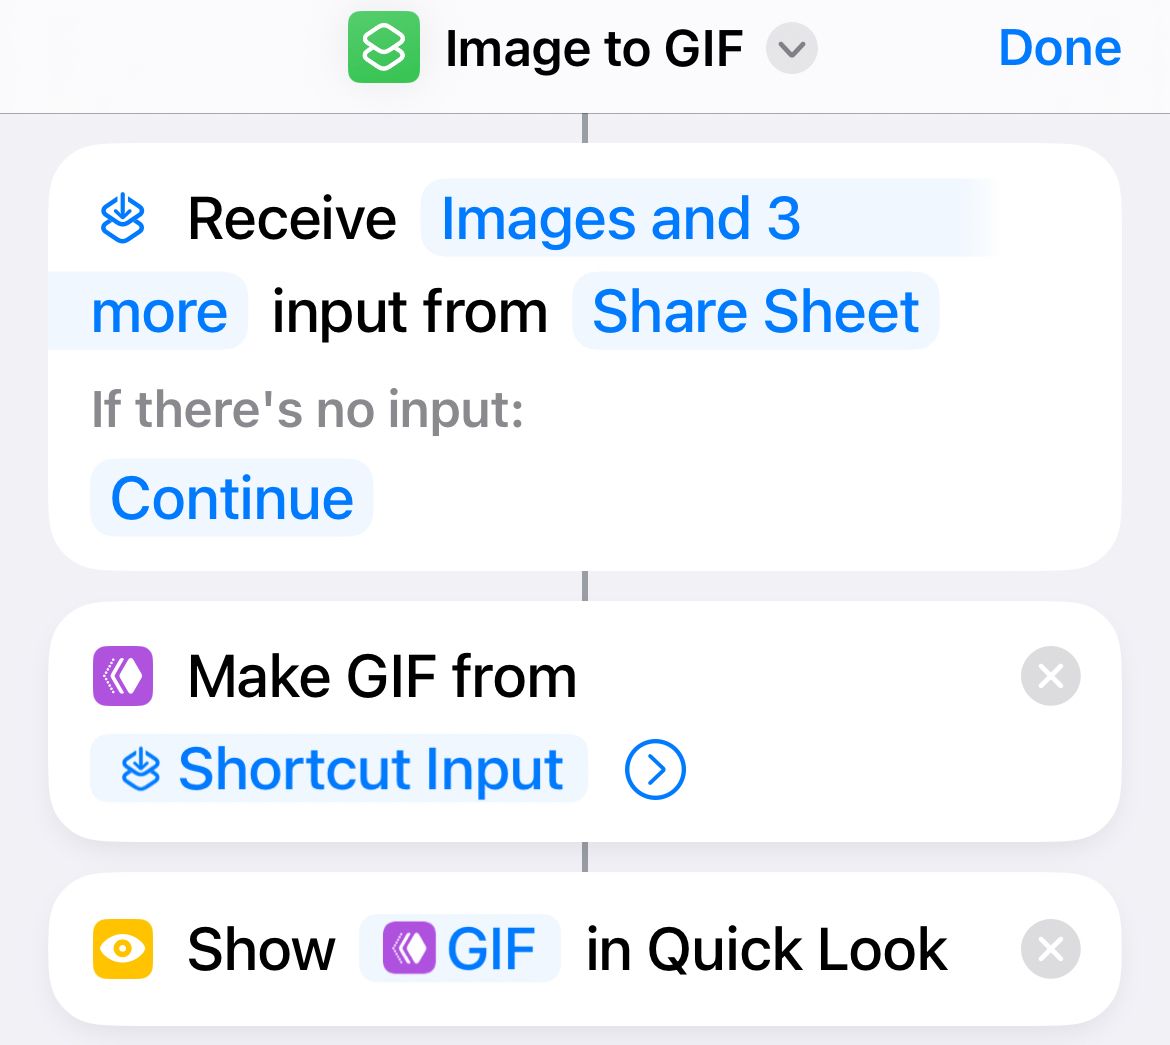 The workflow for creating a GIF in iPhone Shortcuts.